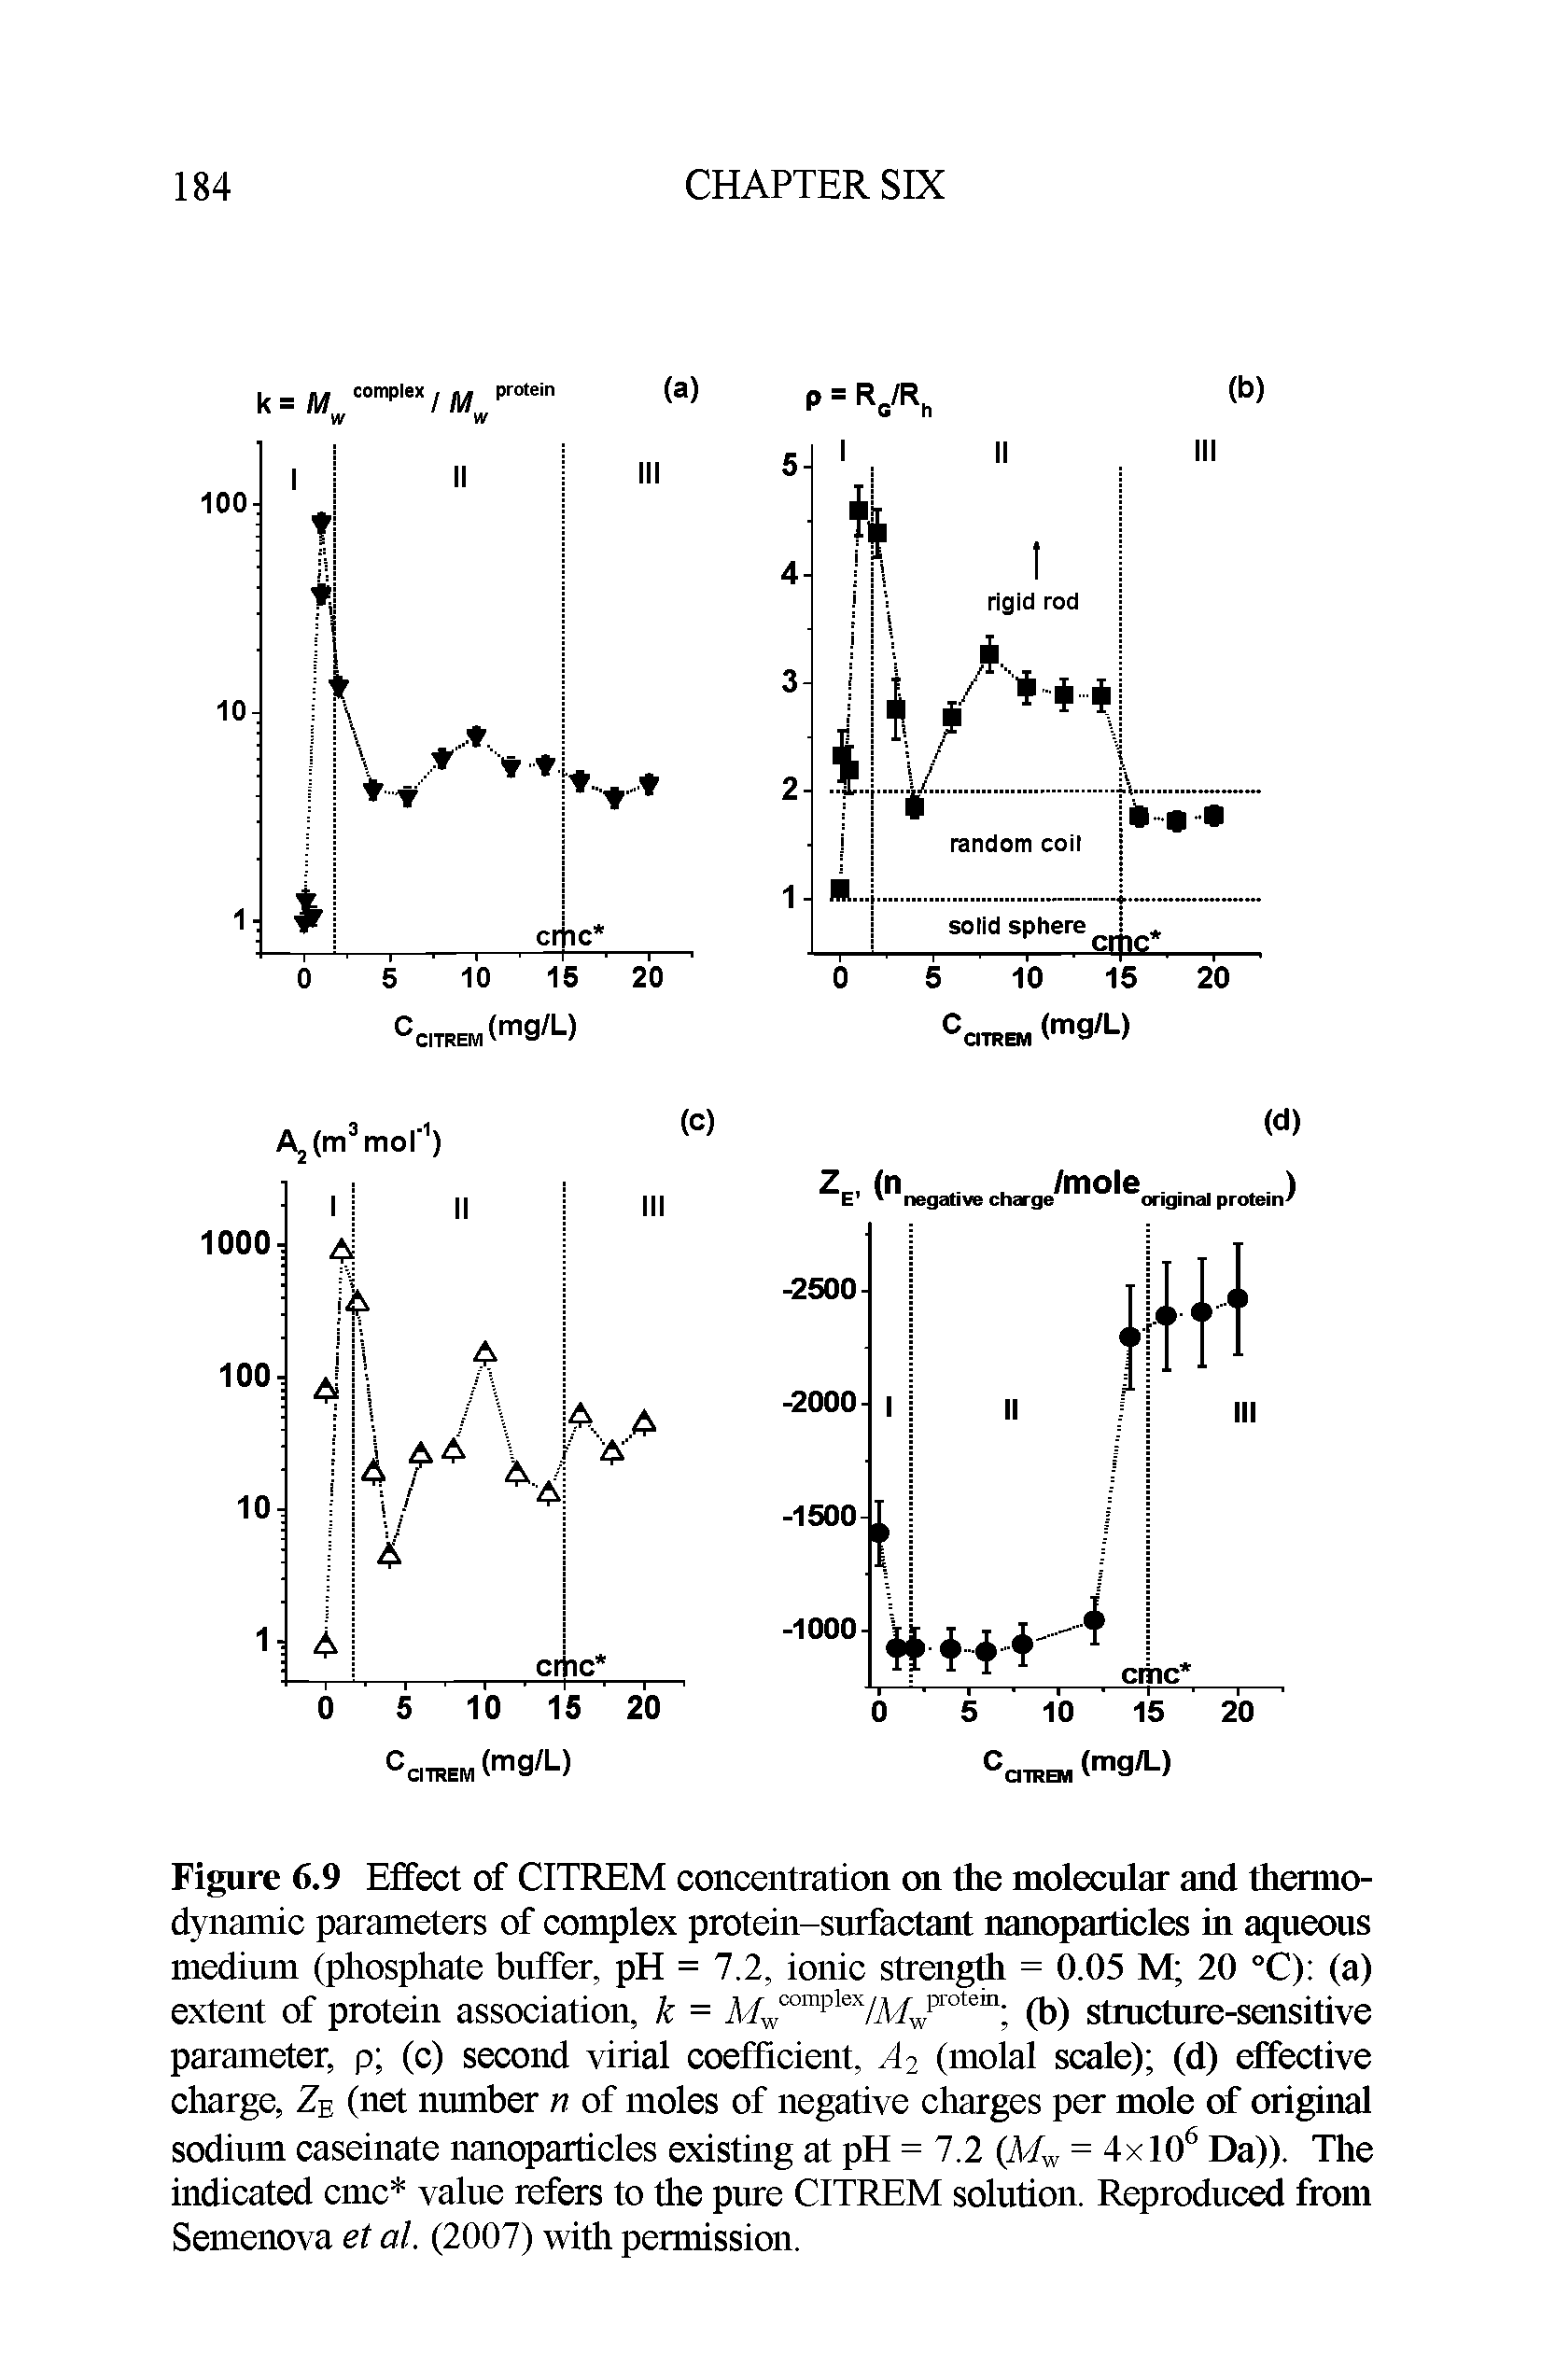 Figure 6.9 Effect of CITREM concentration on the molecular and thermodynamic parameters of complex protein-surfactant nanoparticles in aqueous medium (phosphate buffer, pH = 7.2, ionic strength = 0.05 M 20 °C) (a) extent of protein association, k = Mwcomplex/Mwprotem (b) structure-sensitive parameter, p (c) second virial coefficient, A2 (rnolal scale) (d) effective charge, ZE (net number n of moles of negative charges per mole of original sodium caseinate nanoparticles existing at pH = 7.2 (Mw = 4xl06 Da)). The indicated cmc value refers to the pure CITREM solution. Reproduced from Semenova et al. (2007) with permission.